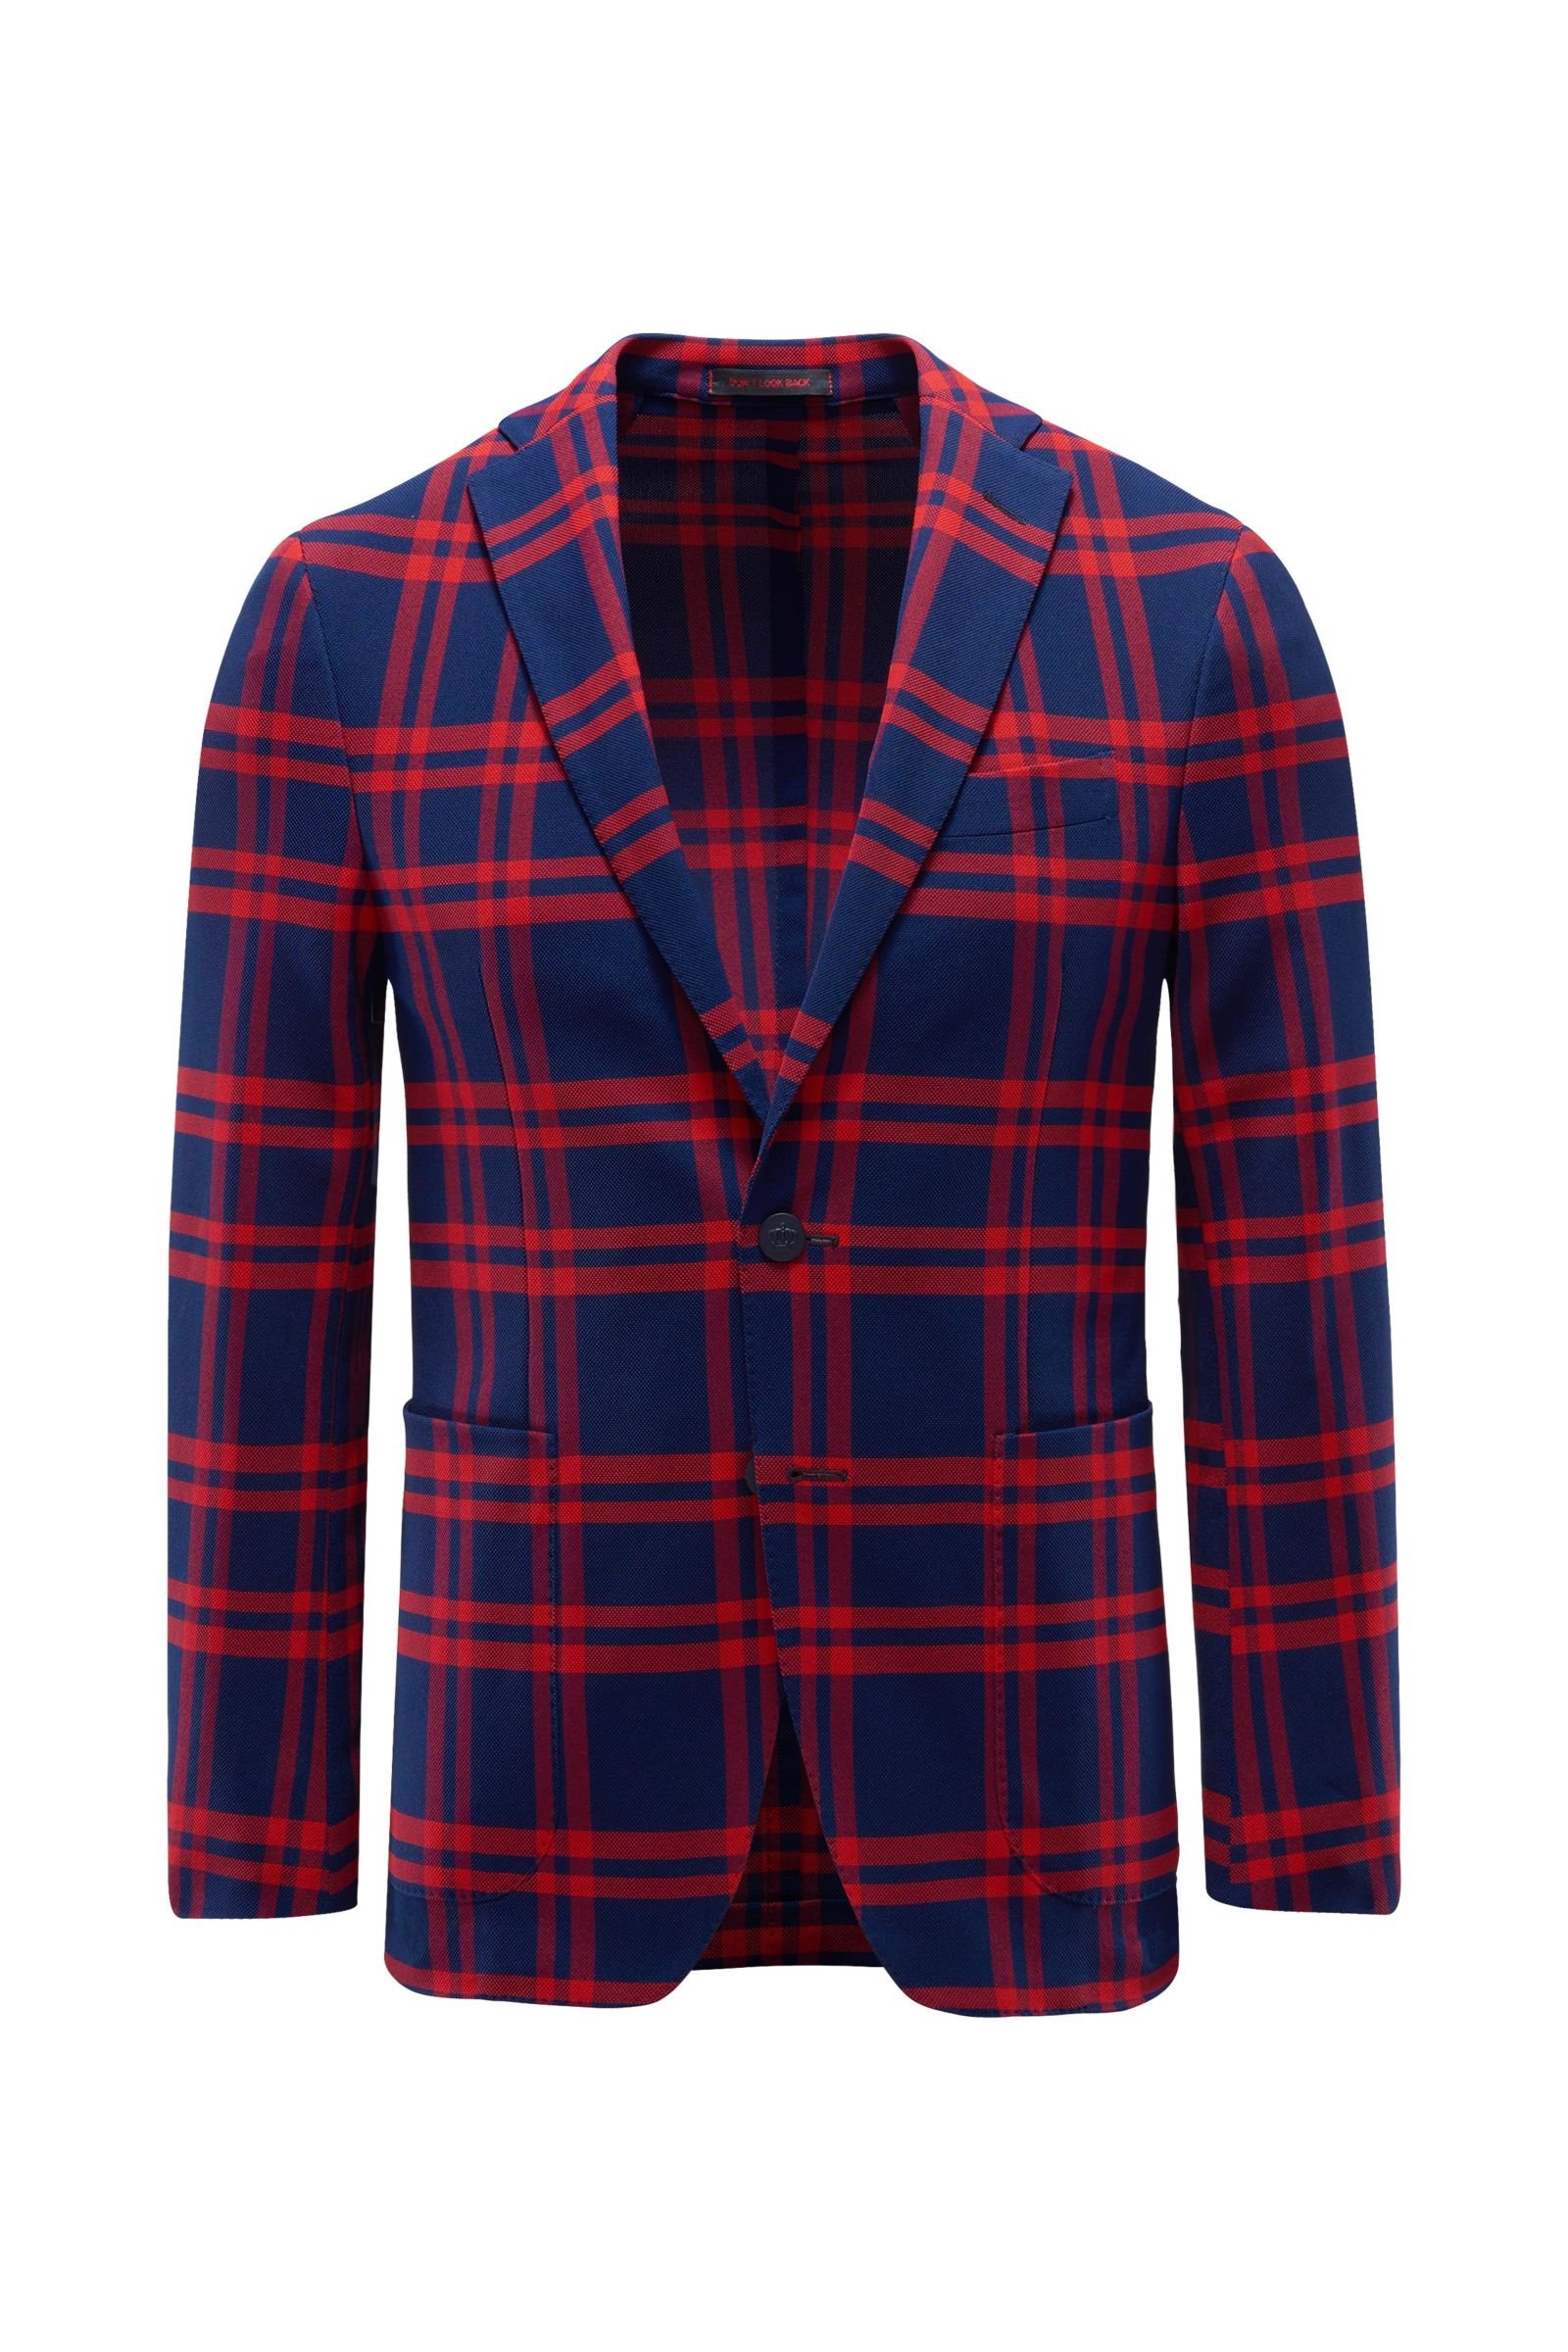 Smart-casual jacket 'Degas' navy/red checked